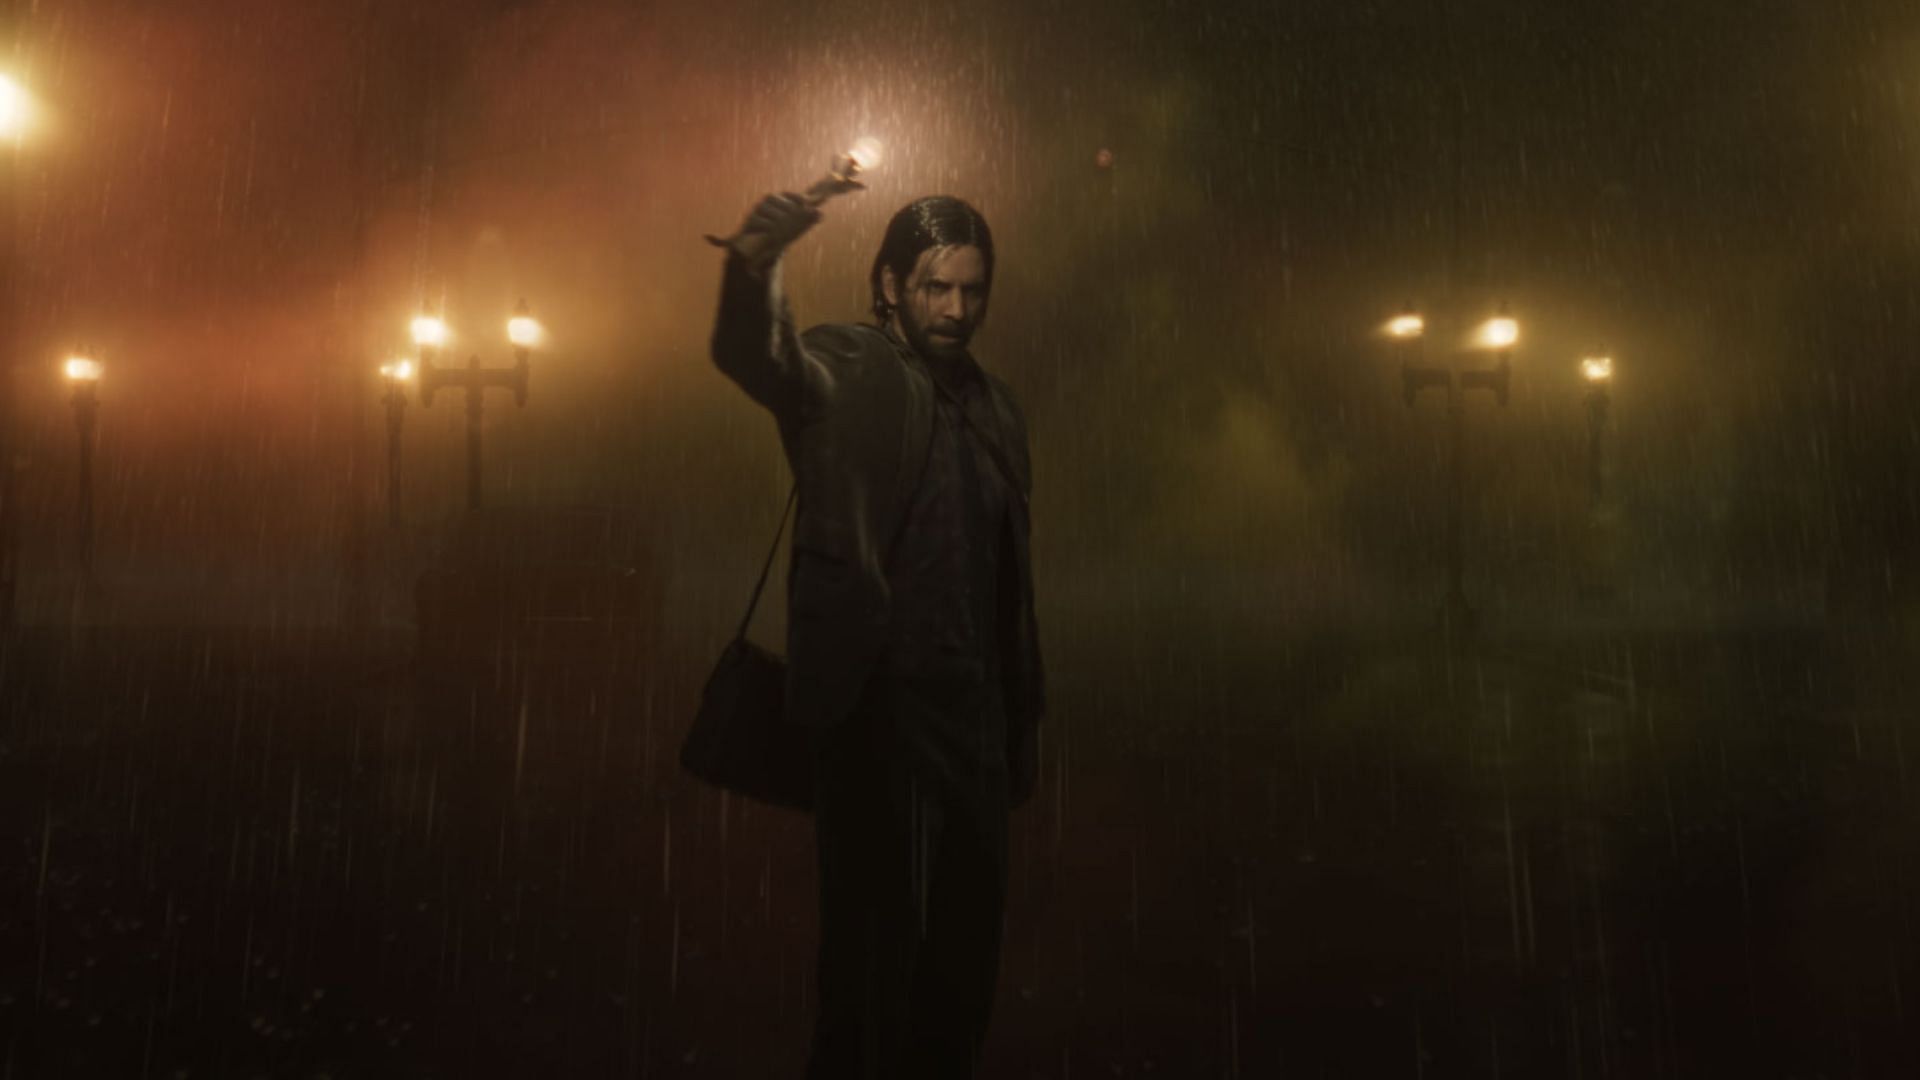 Alan Wake 2's PC system requirements are hefty, with an RTX2060 minimum